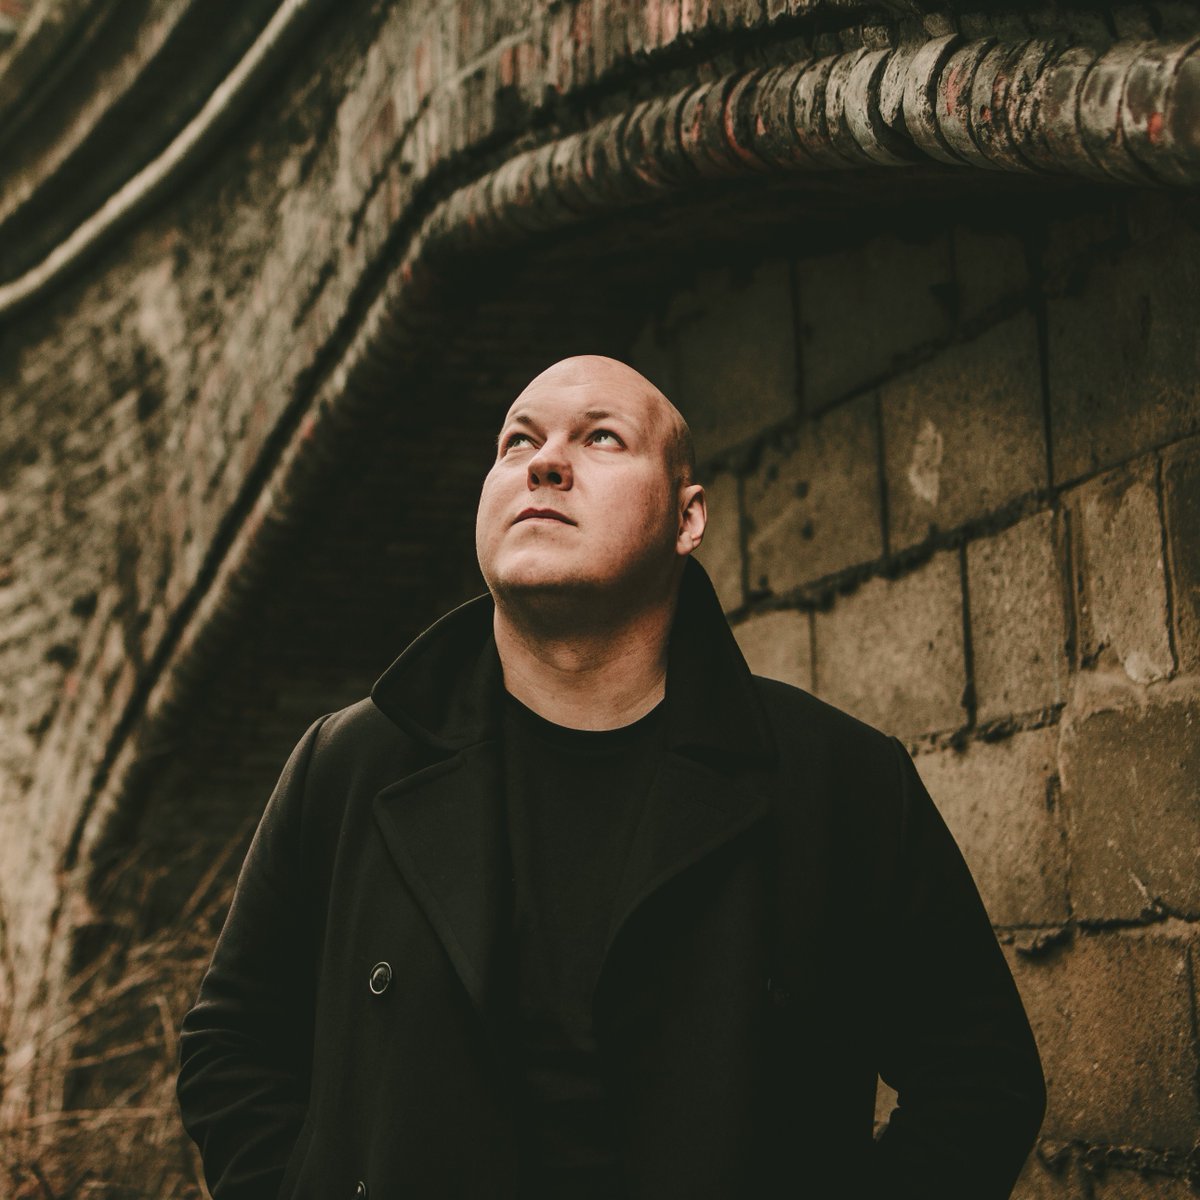 Alan Fitzpatrick | 21.10.22 | Opium, Dublin | Just Announced! Tickets will be available 10am Monday via: bit.ly/3BI53NE Techno legend Alan Fitzpatrick plays in Dublin next month! Don't miss out on seeing this electronic music powerhouse live. @AlanFitzpatrick